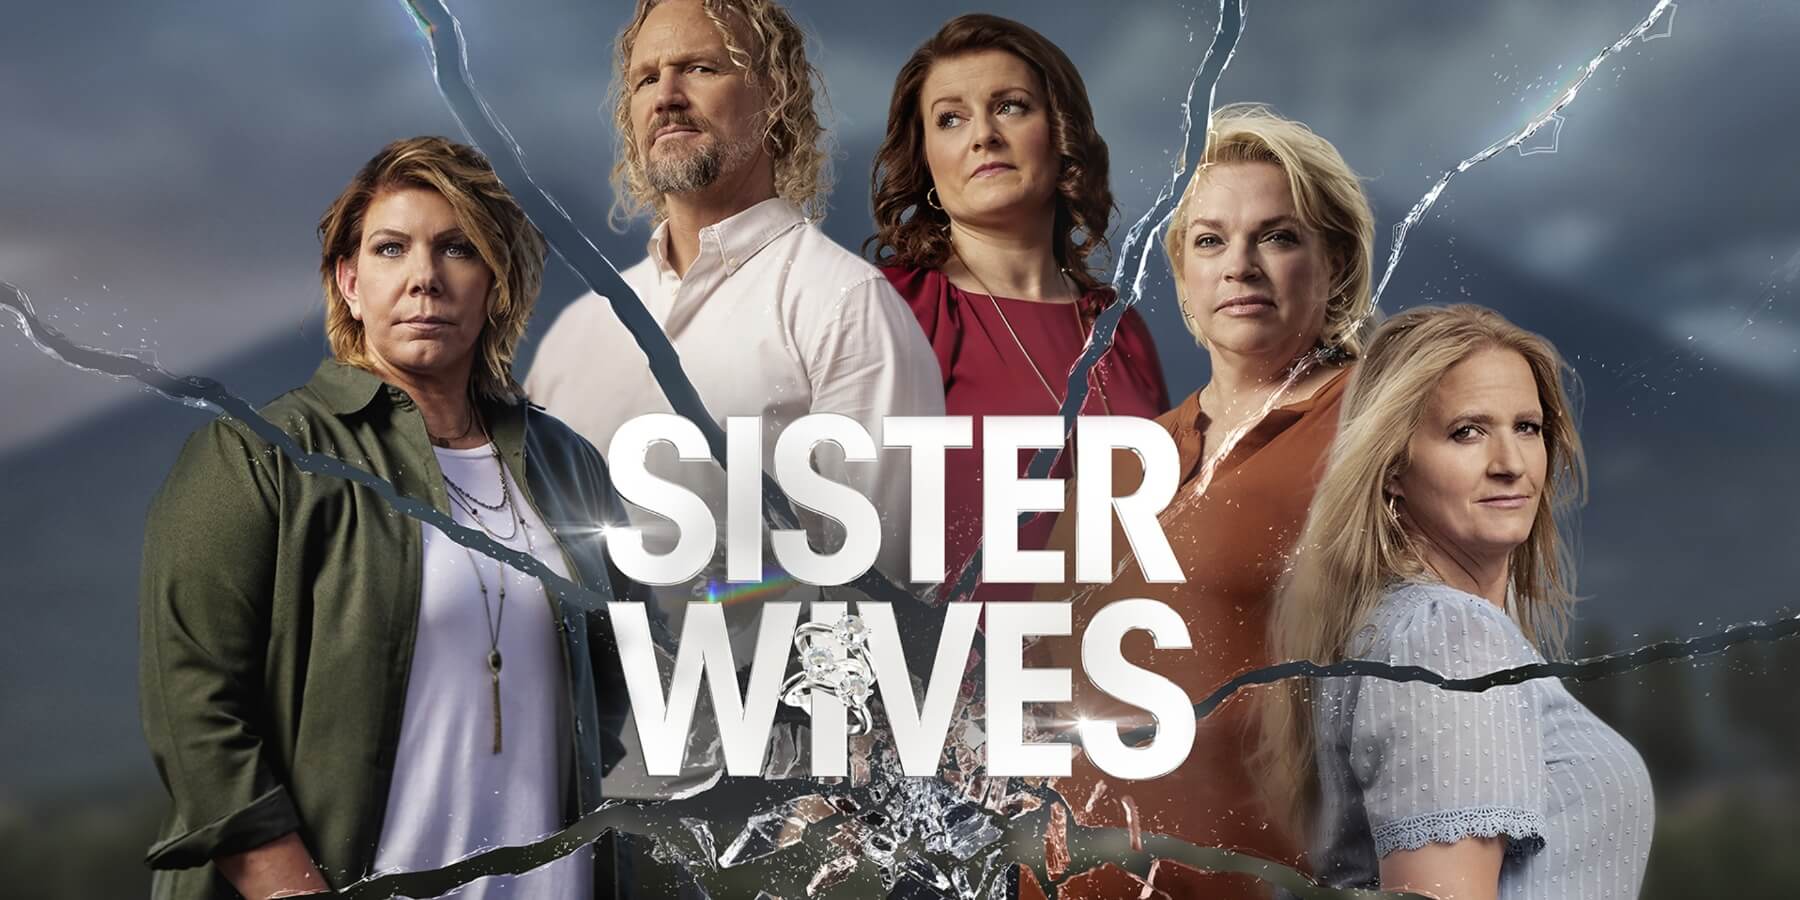 'Sister Wives' cast for season 18 of TLC series